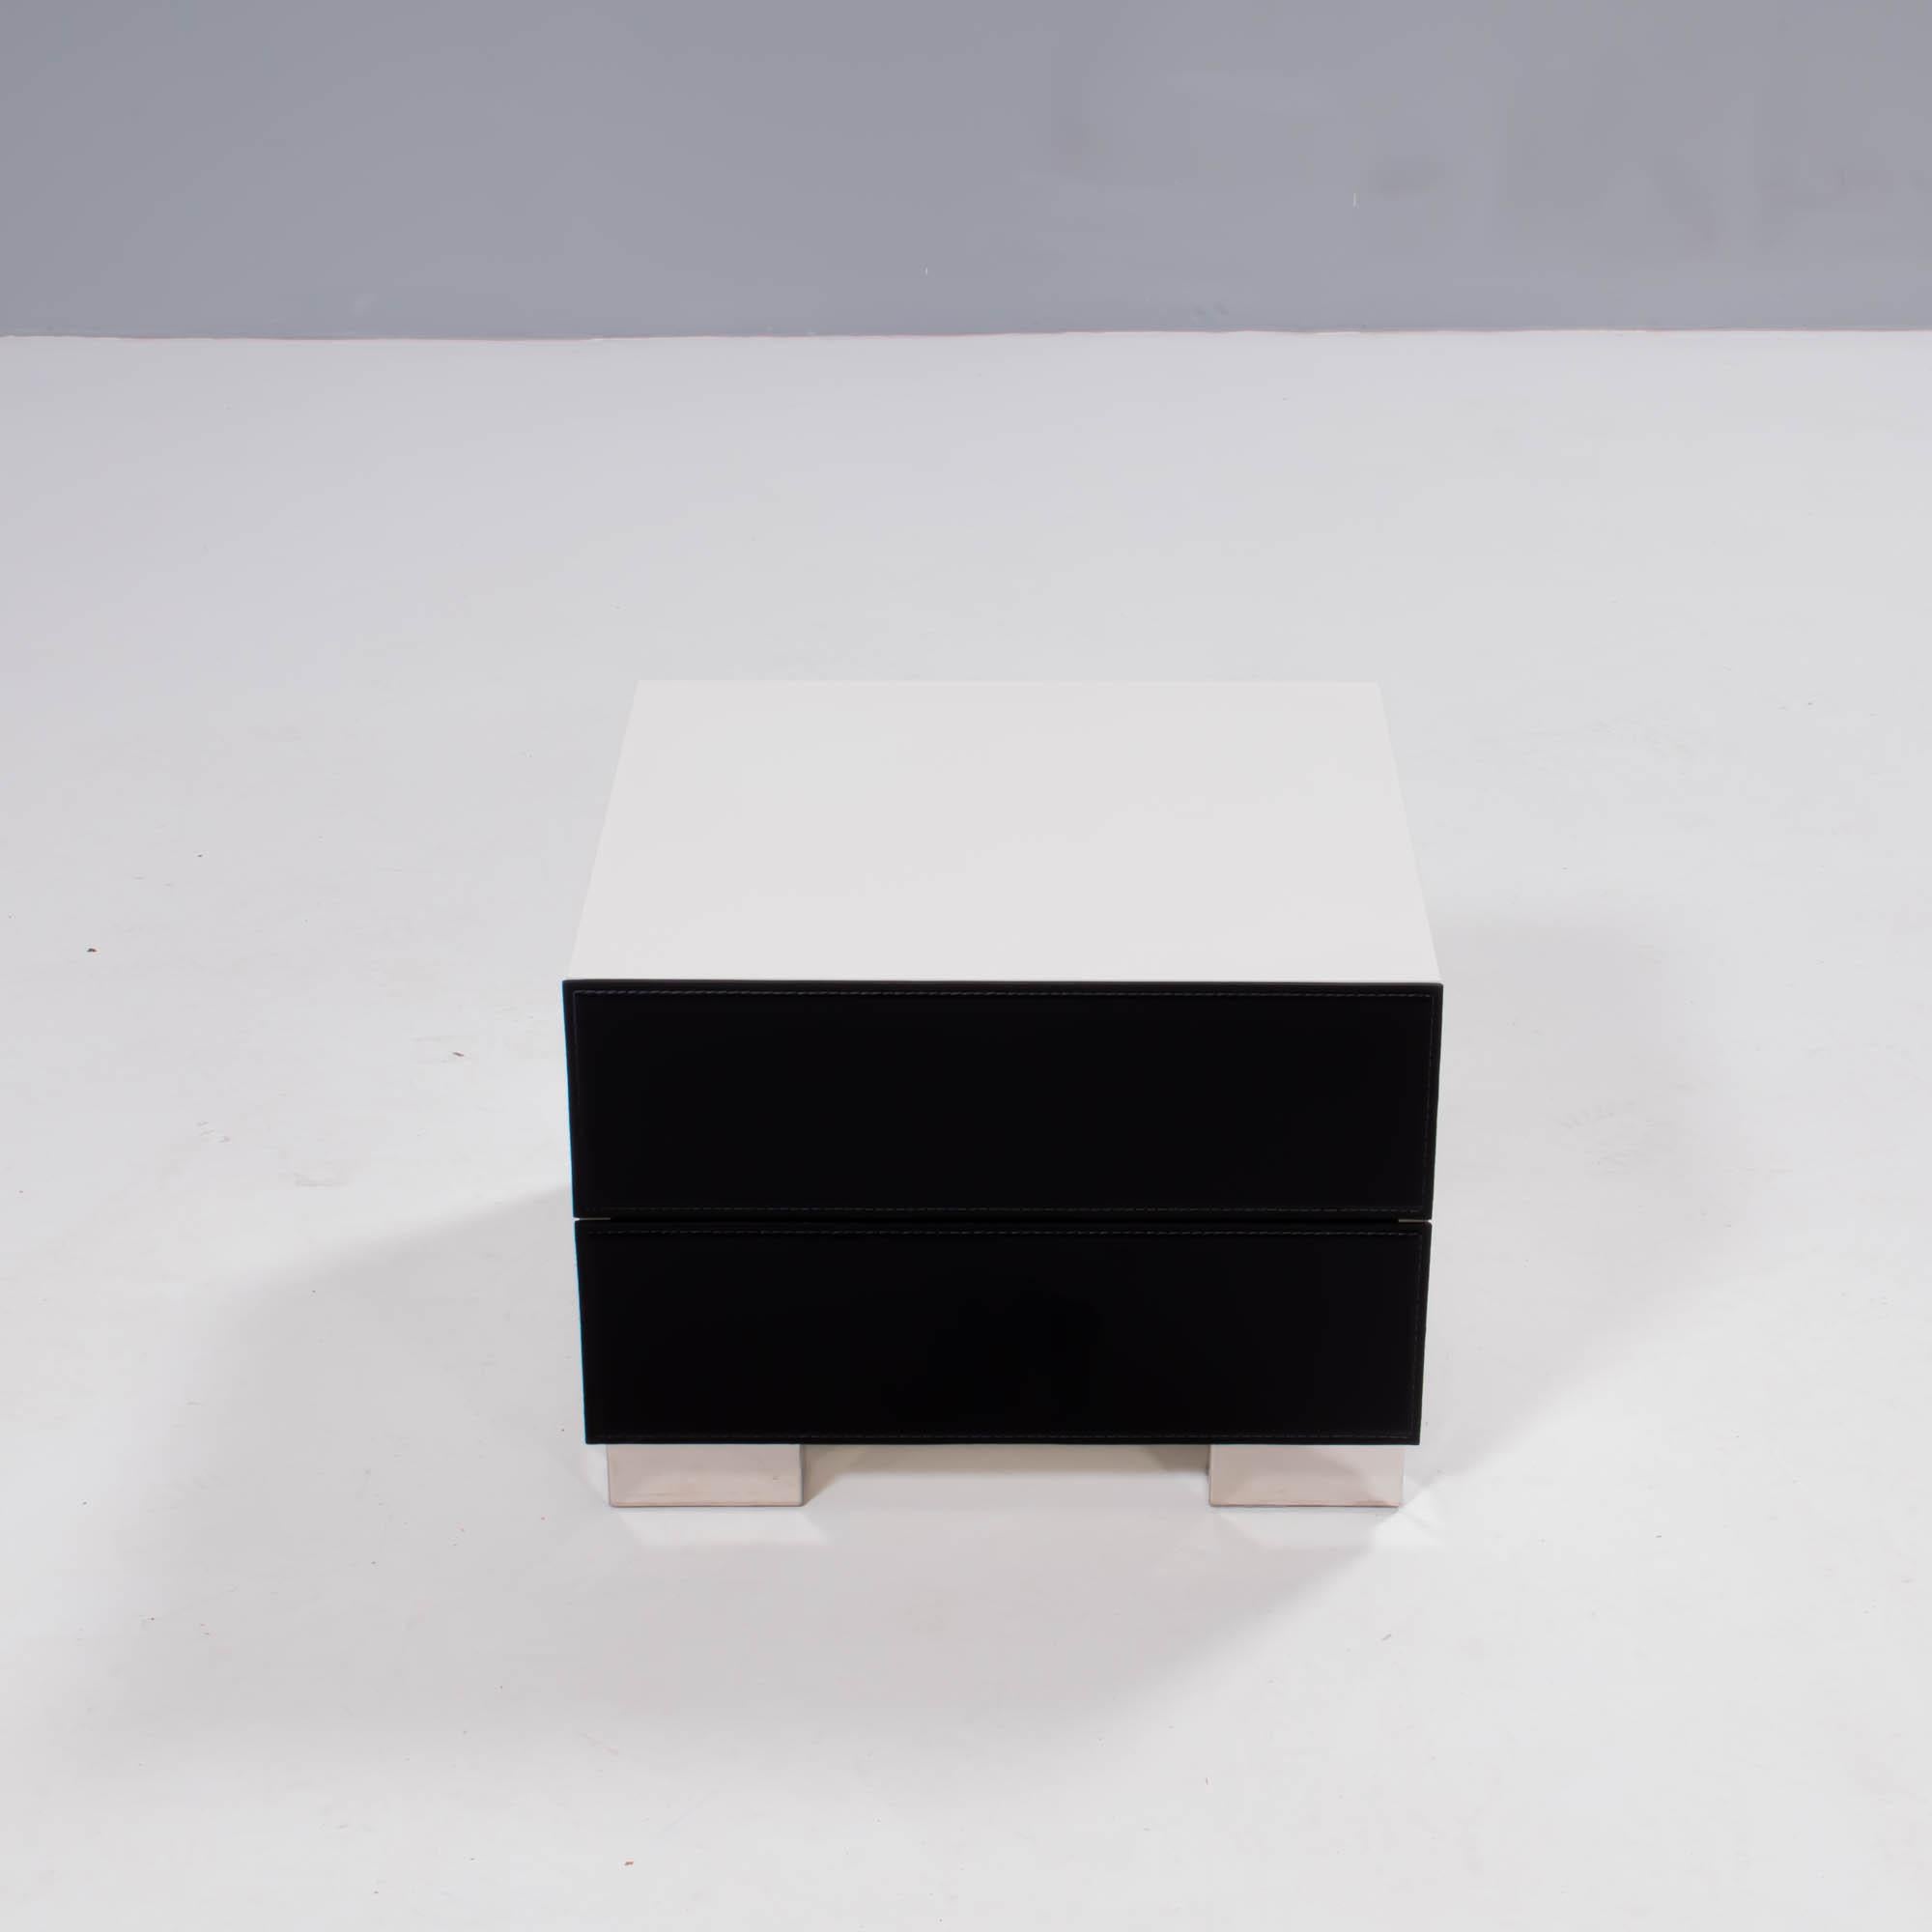 Designed by Paolo Cattelan in 2004, the Dandy bedside table is a sleek contemporary design.

Constructed from white lacquered wood, the bedside table features two drawers with black leather fronts, finished with seam detailing.

The stainless